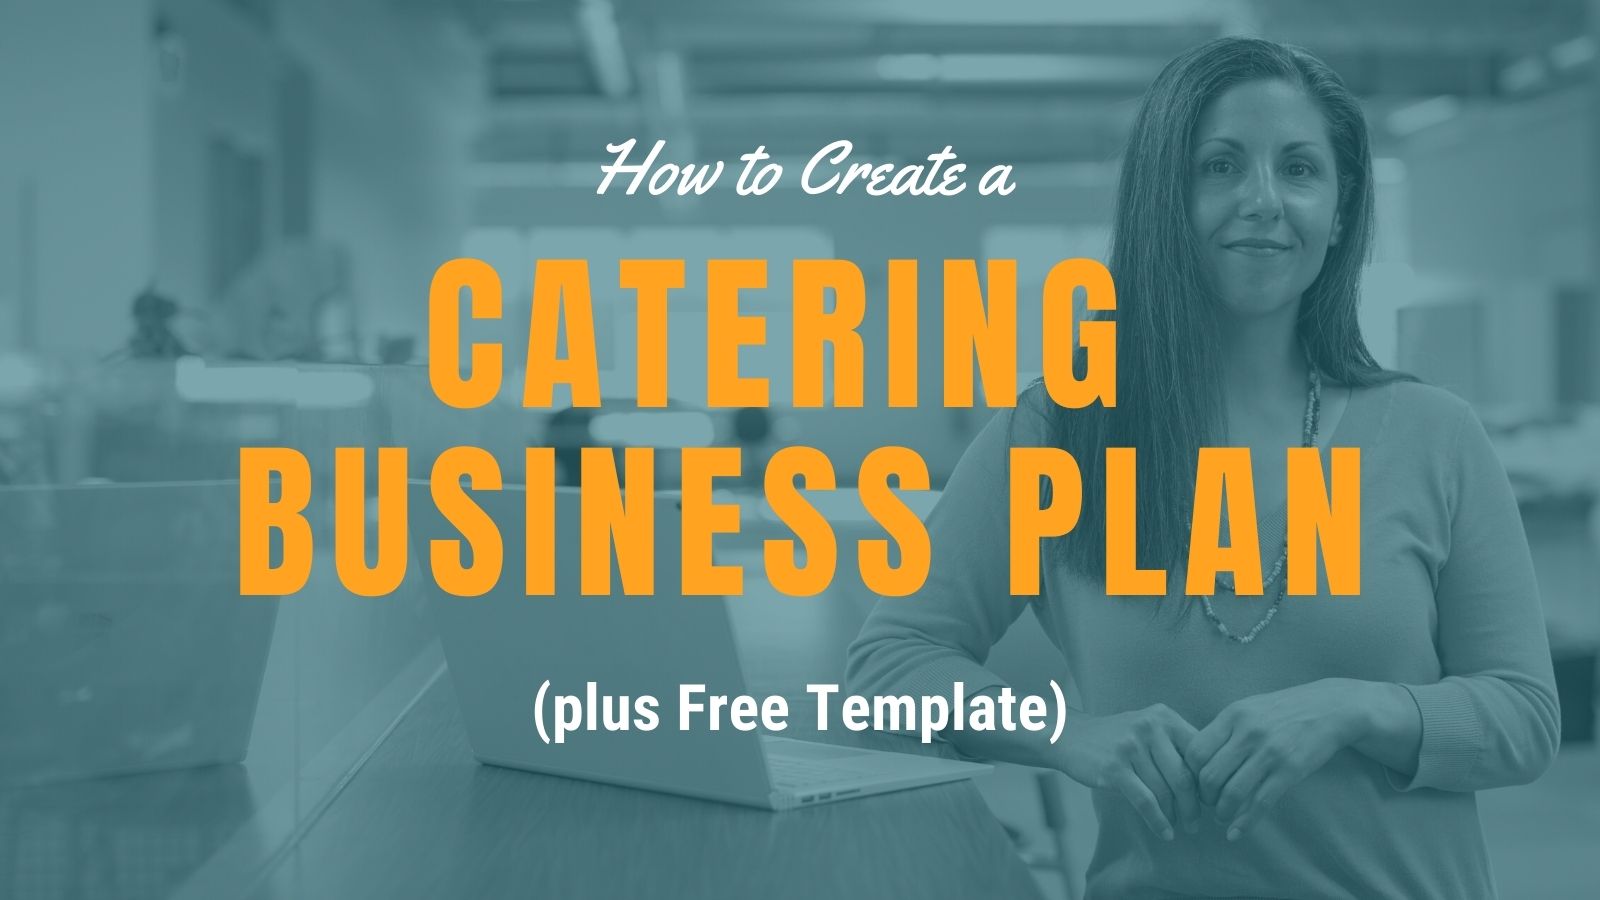 catering business plan from home